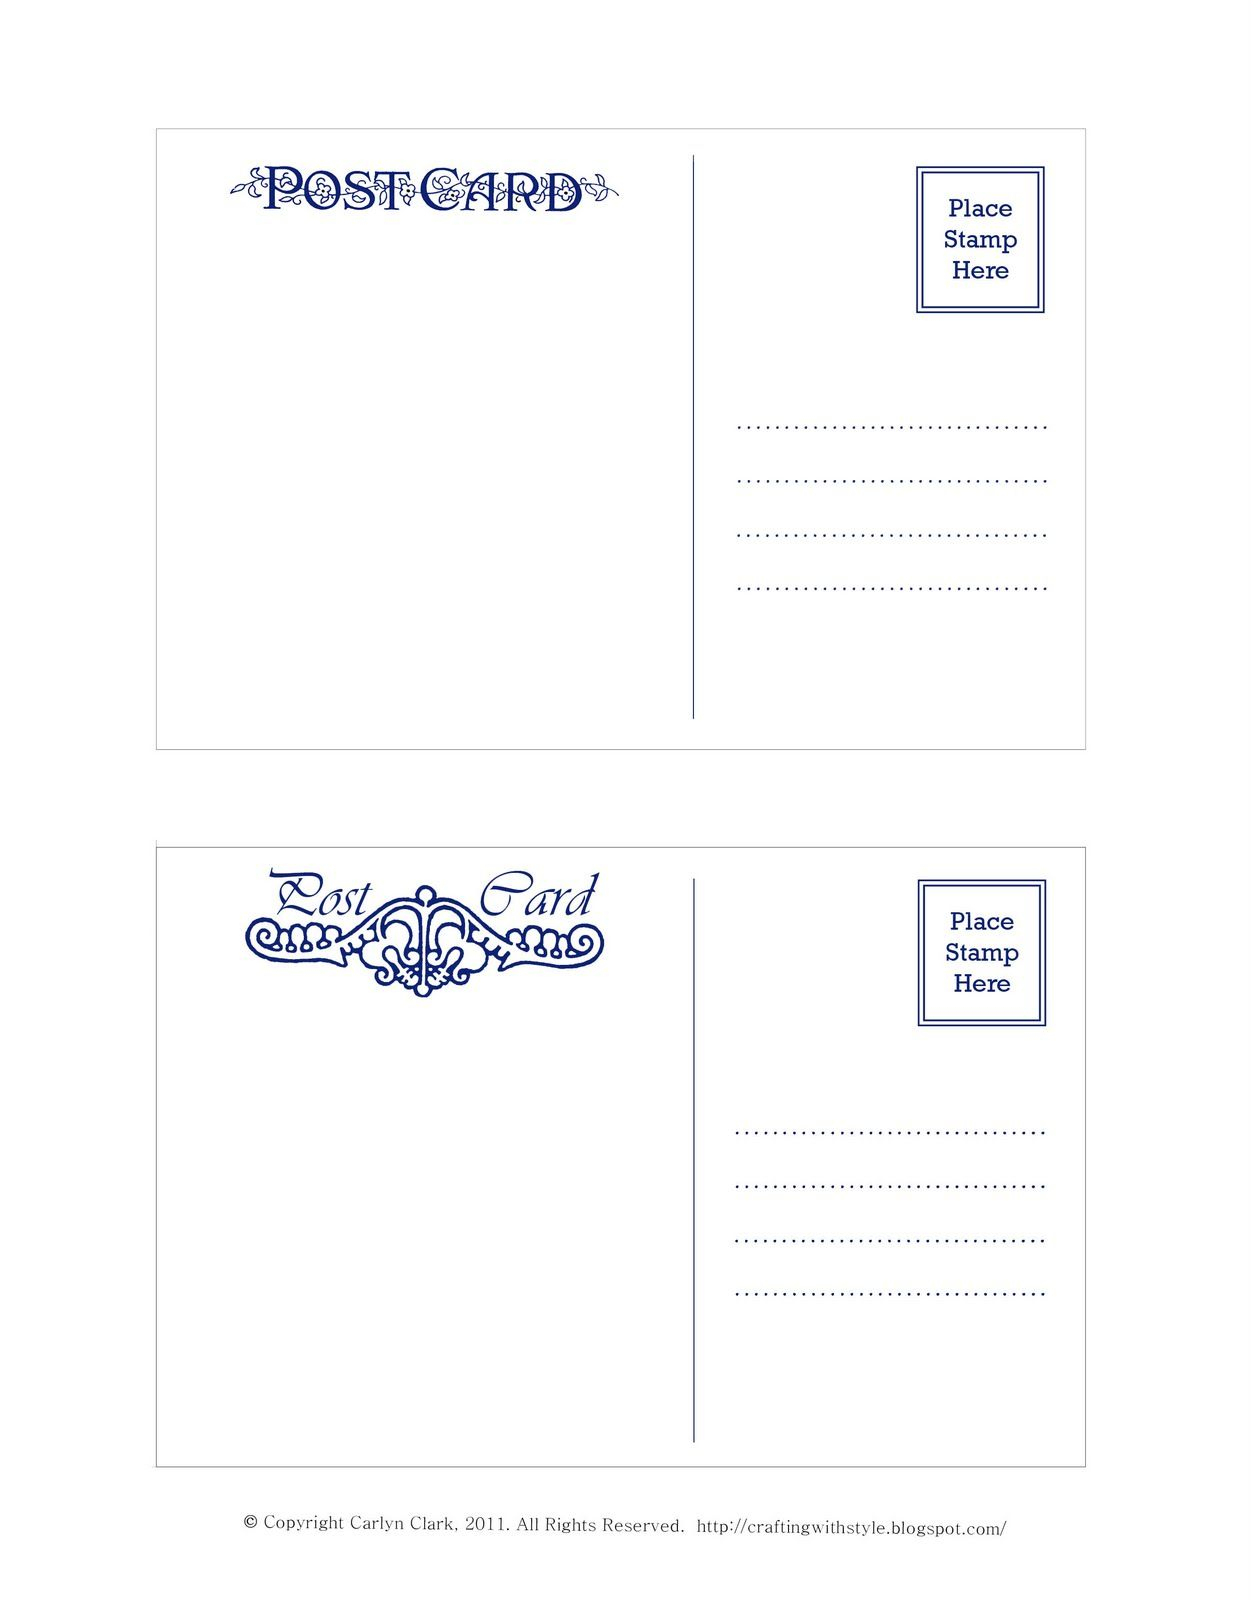 Crafting With Style: Free Postcard Templates | Postcards | Pinterest - Free Blank Printable Postcards